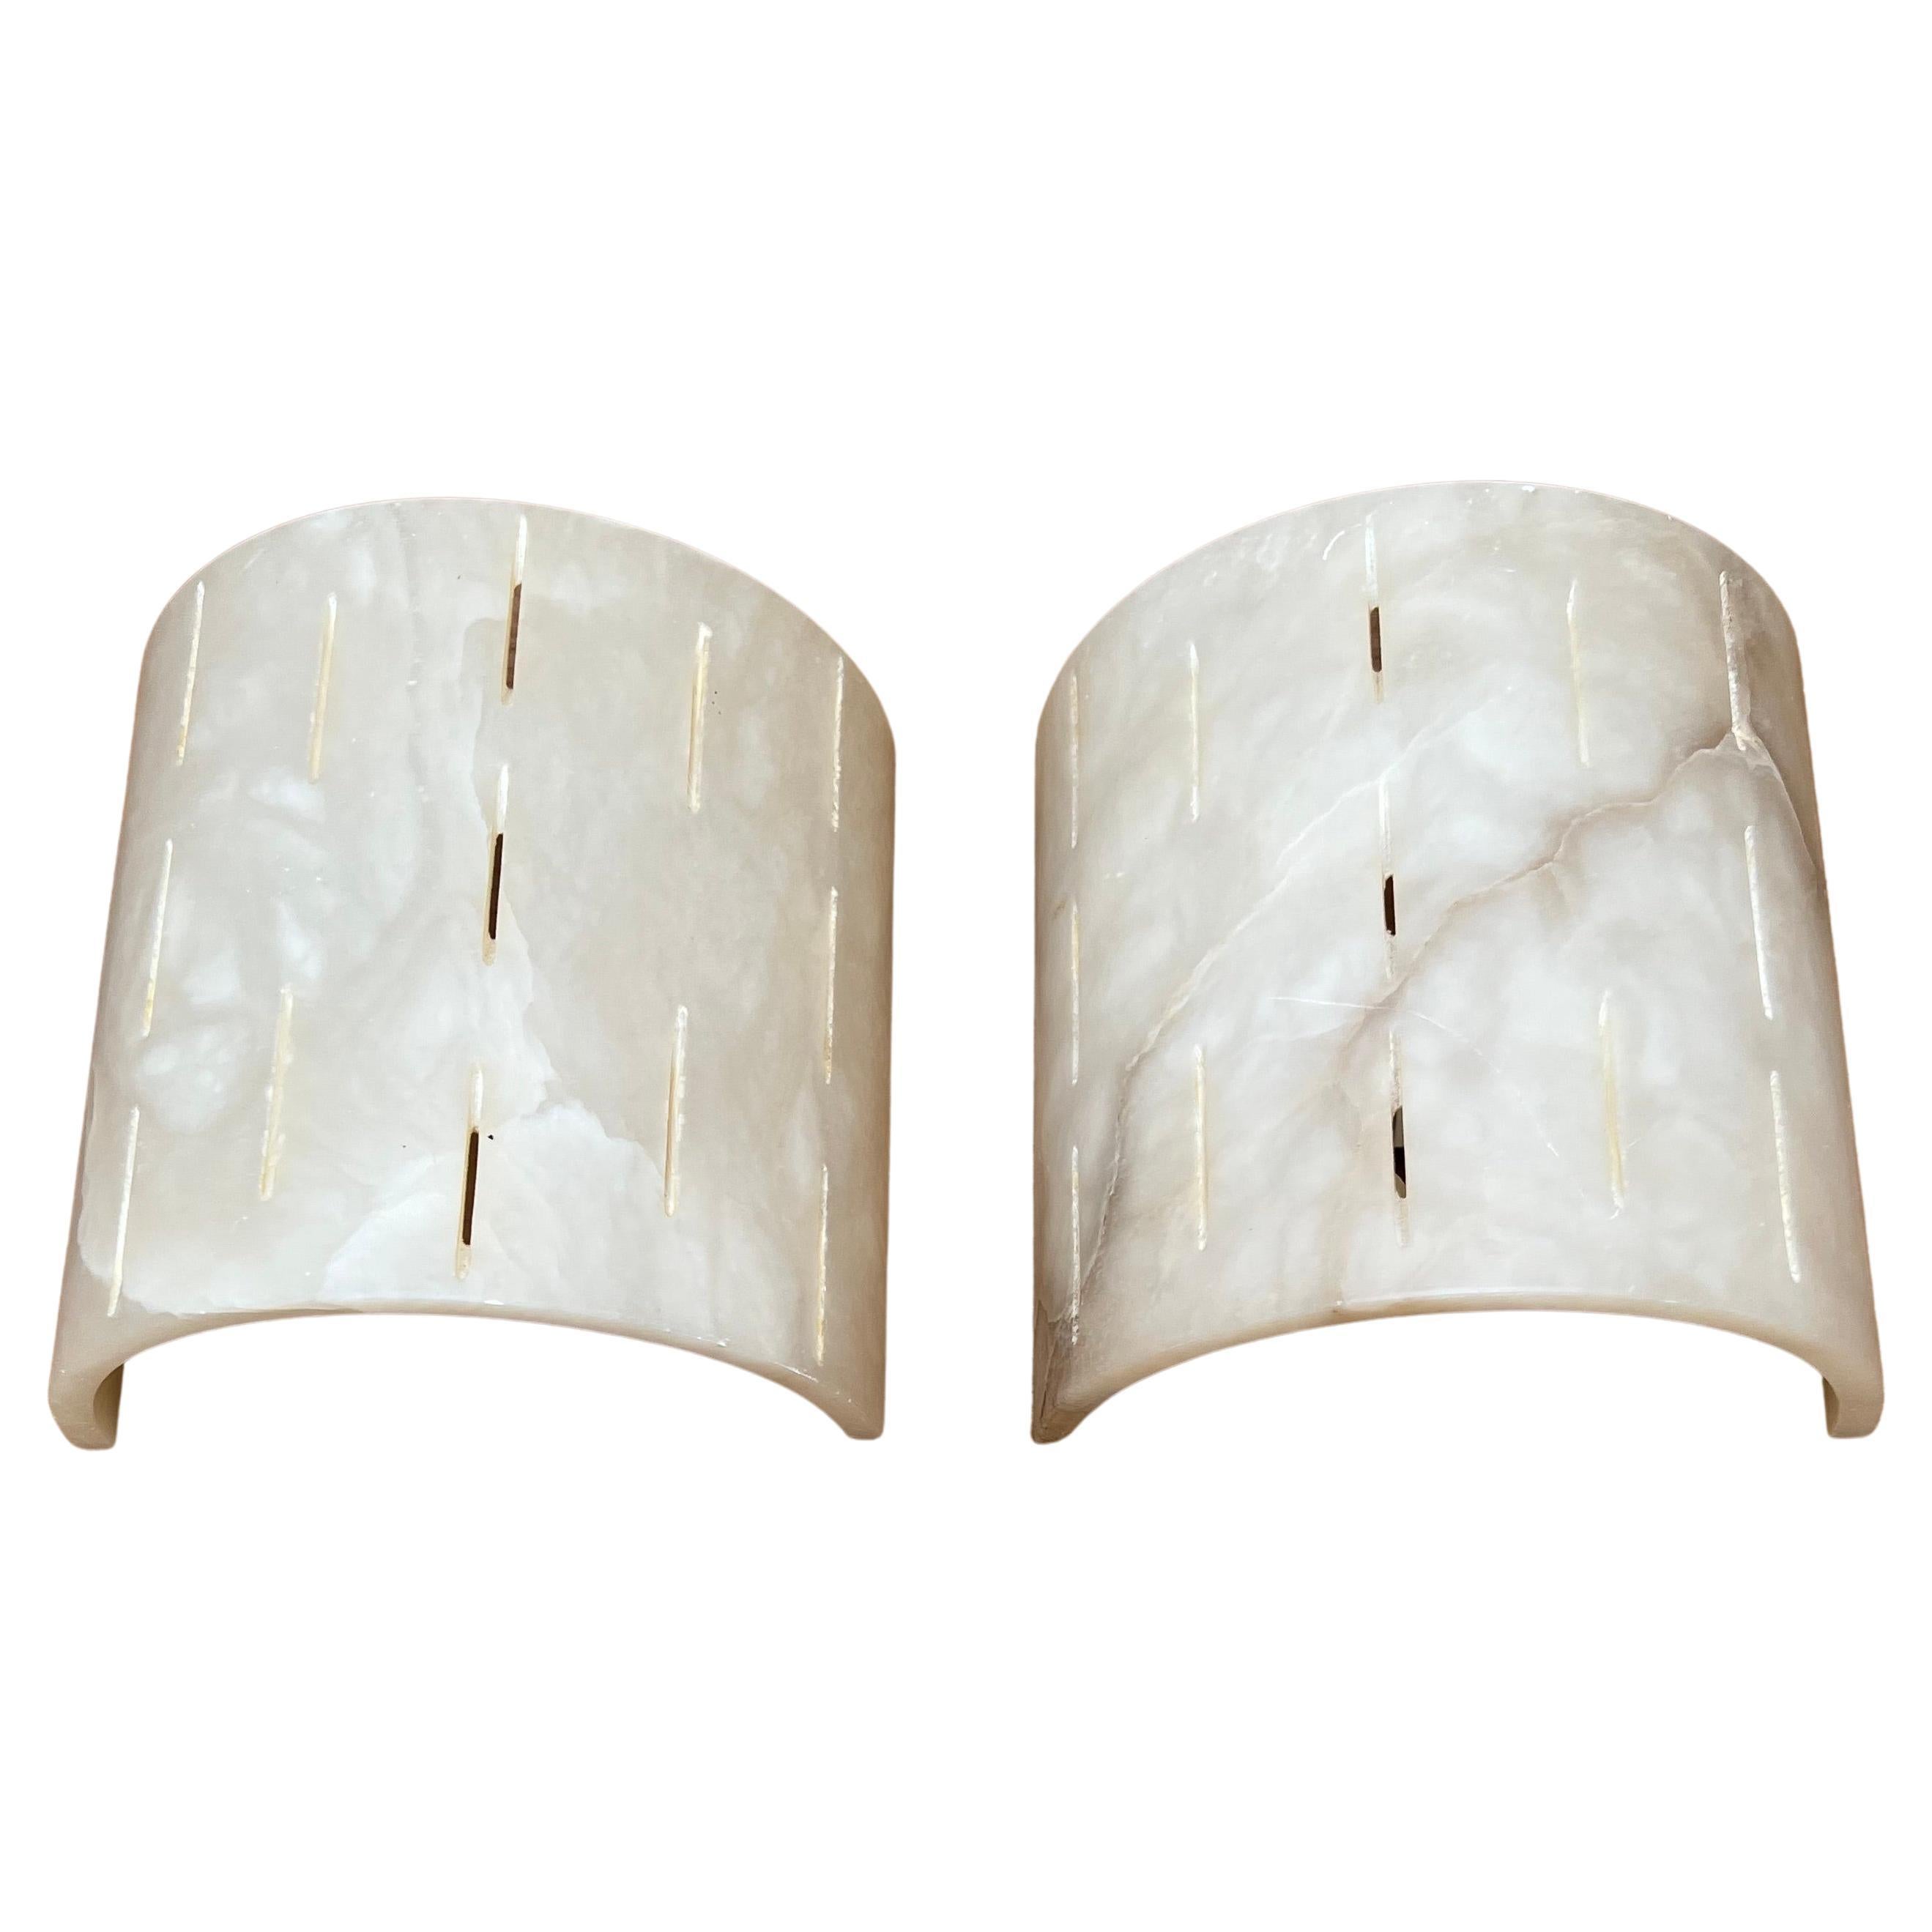 Timeless Design Pair of Art Deco Style Alabaster Wall Sconces / Light Fixtures For Sale